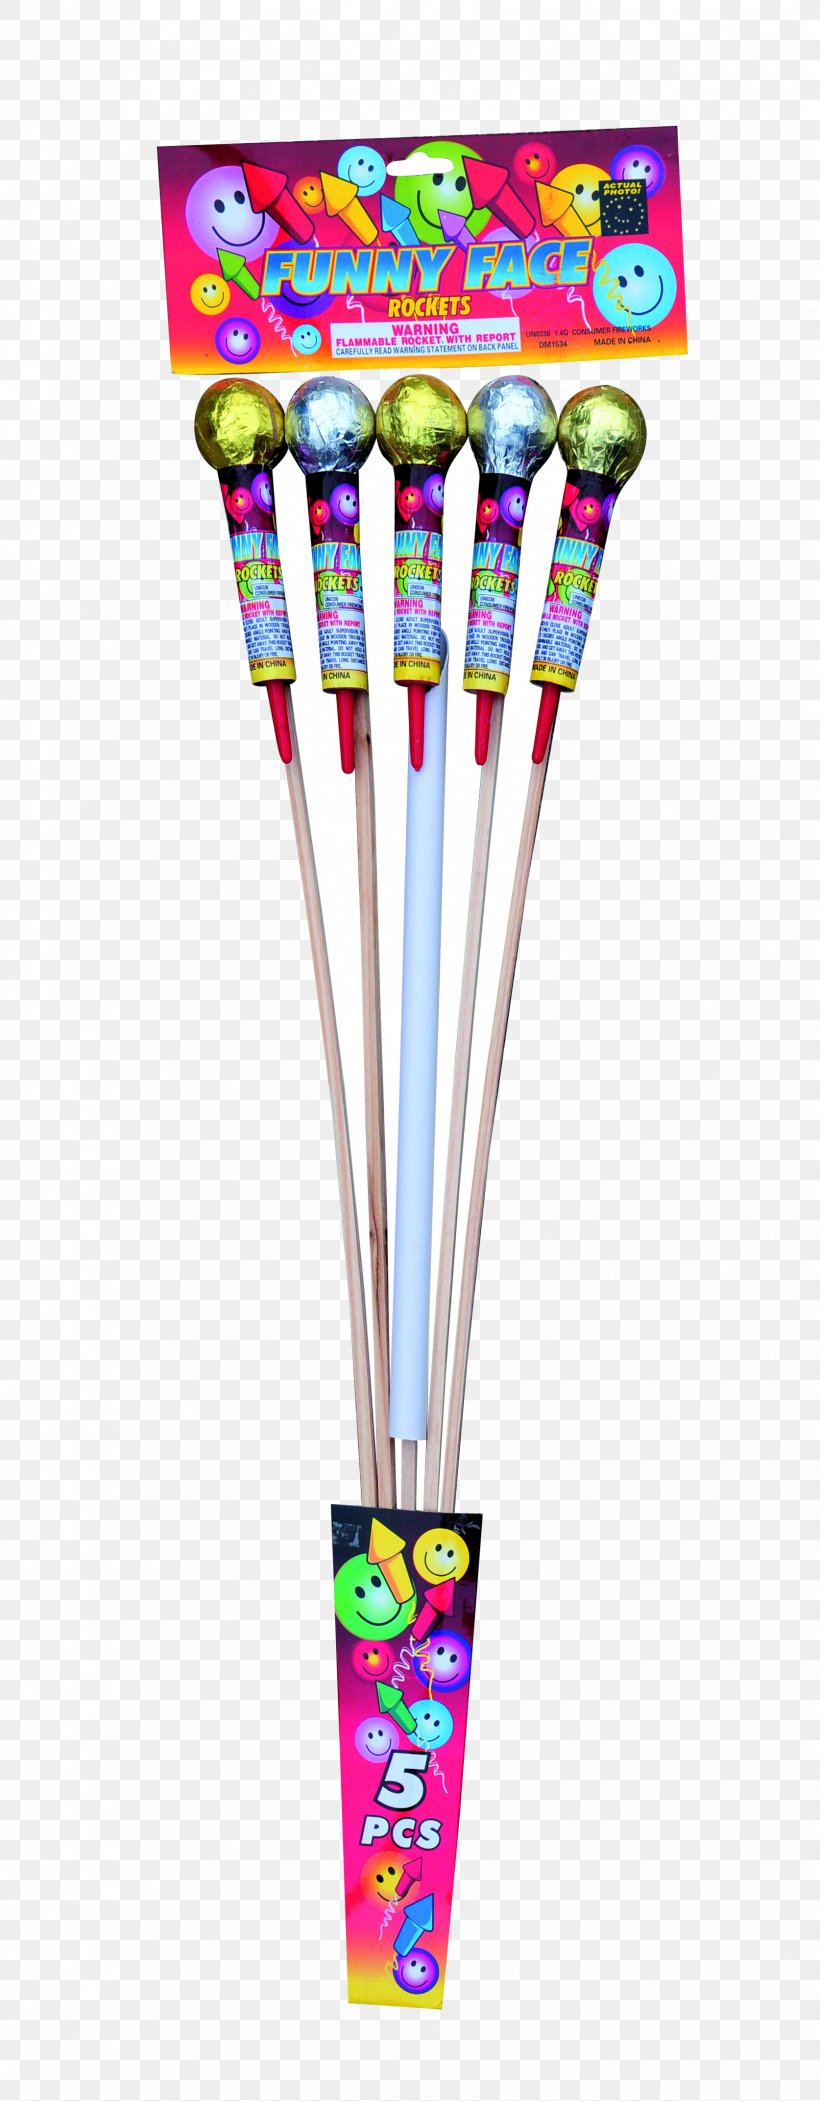 Houston Rockets Skyrocket Fireworks Household Cleaning Supply, PNG, 1674x4290px, Houston Rockets, Fire, Fireworks, Household Cleaning Supply, Houston Download Free